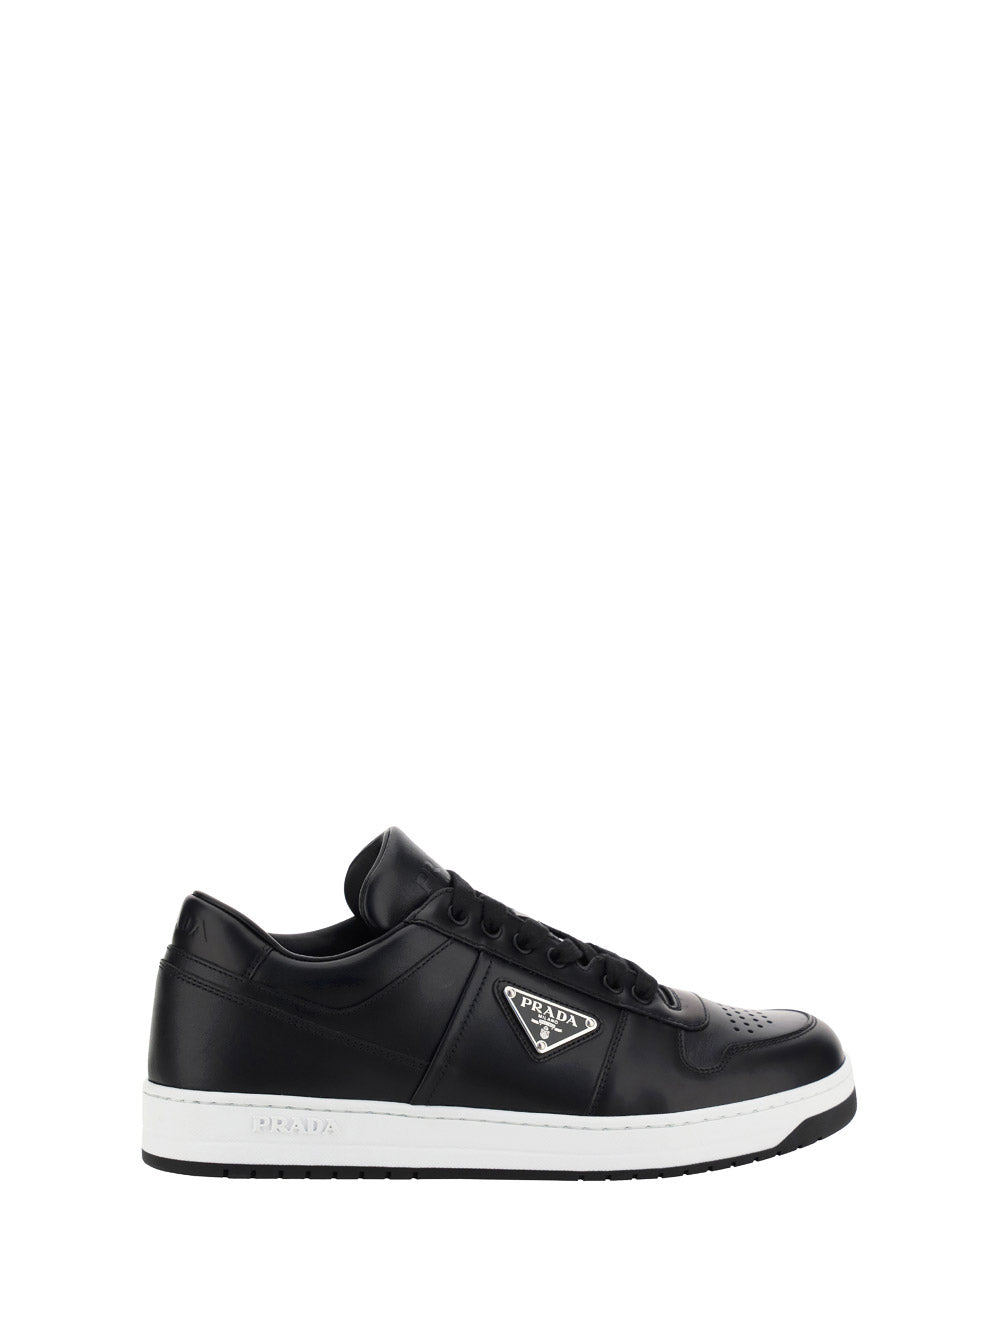 Downtown Leather Sneakers - Black